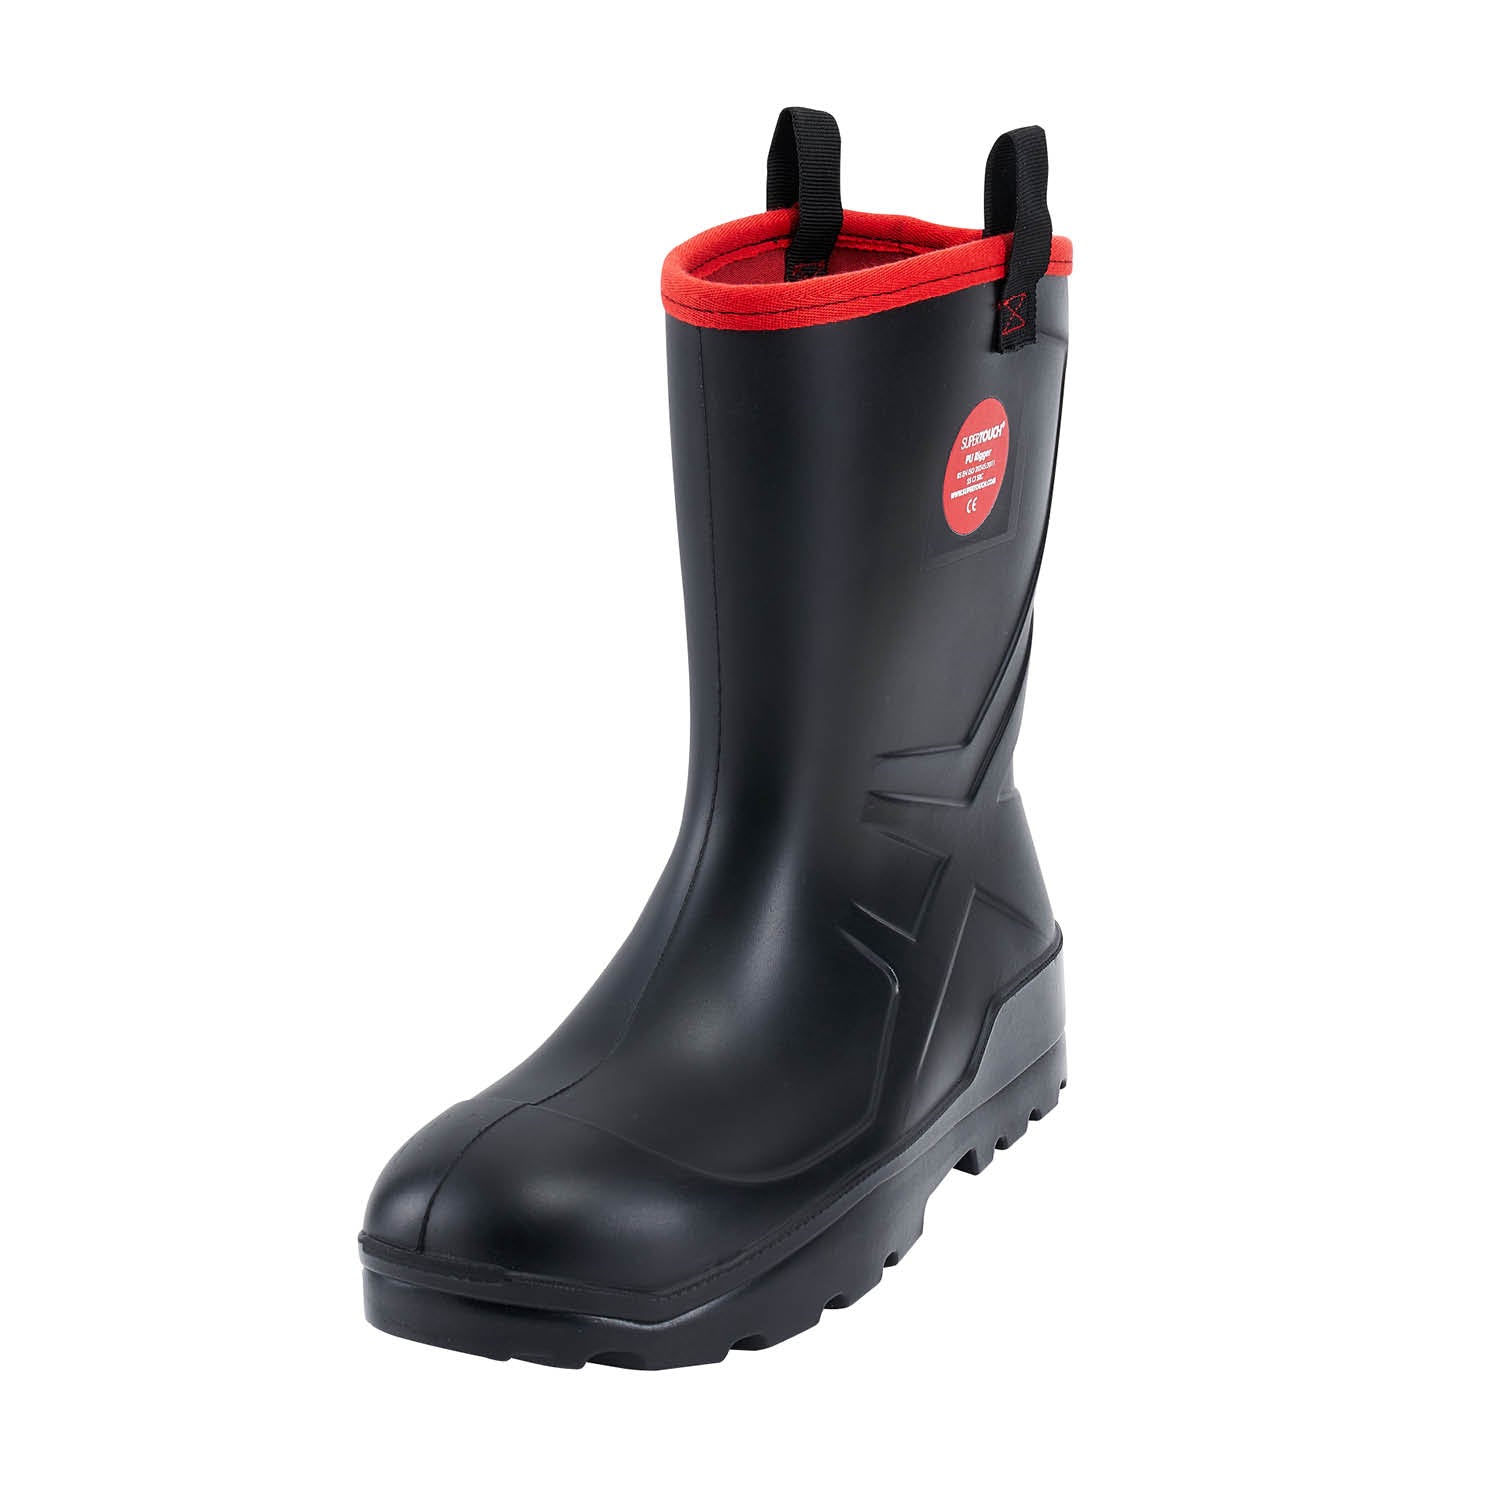 Supertouch PU Rigger Steel Toe Safety Wellington